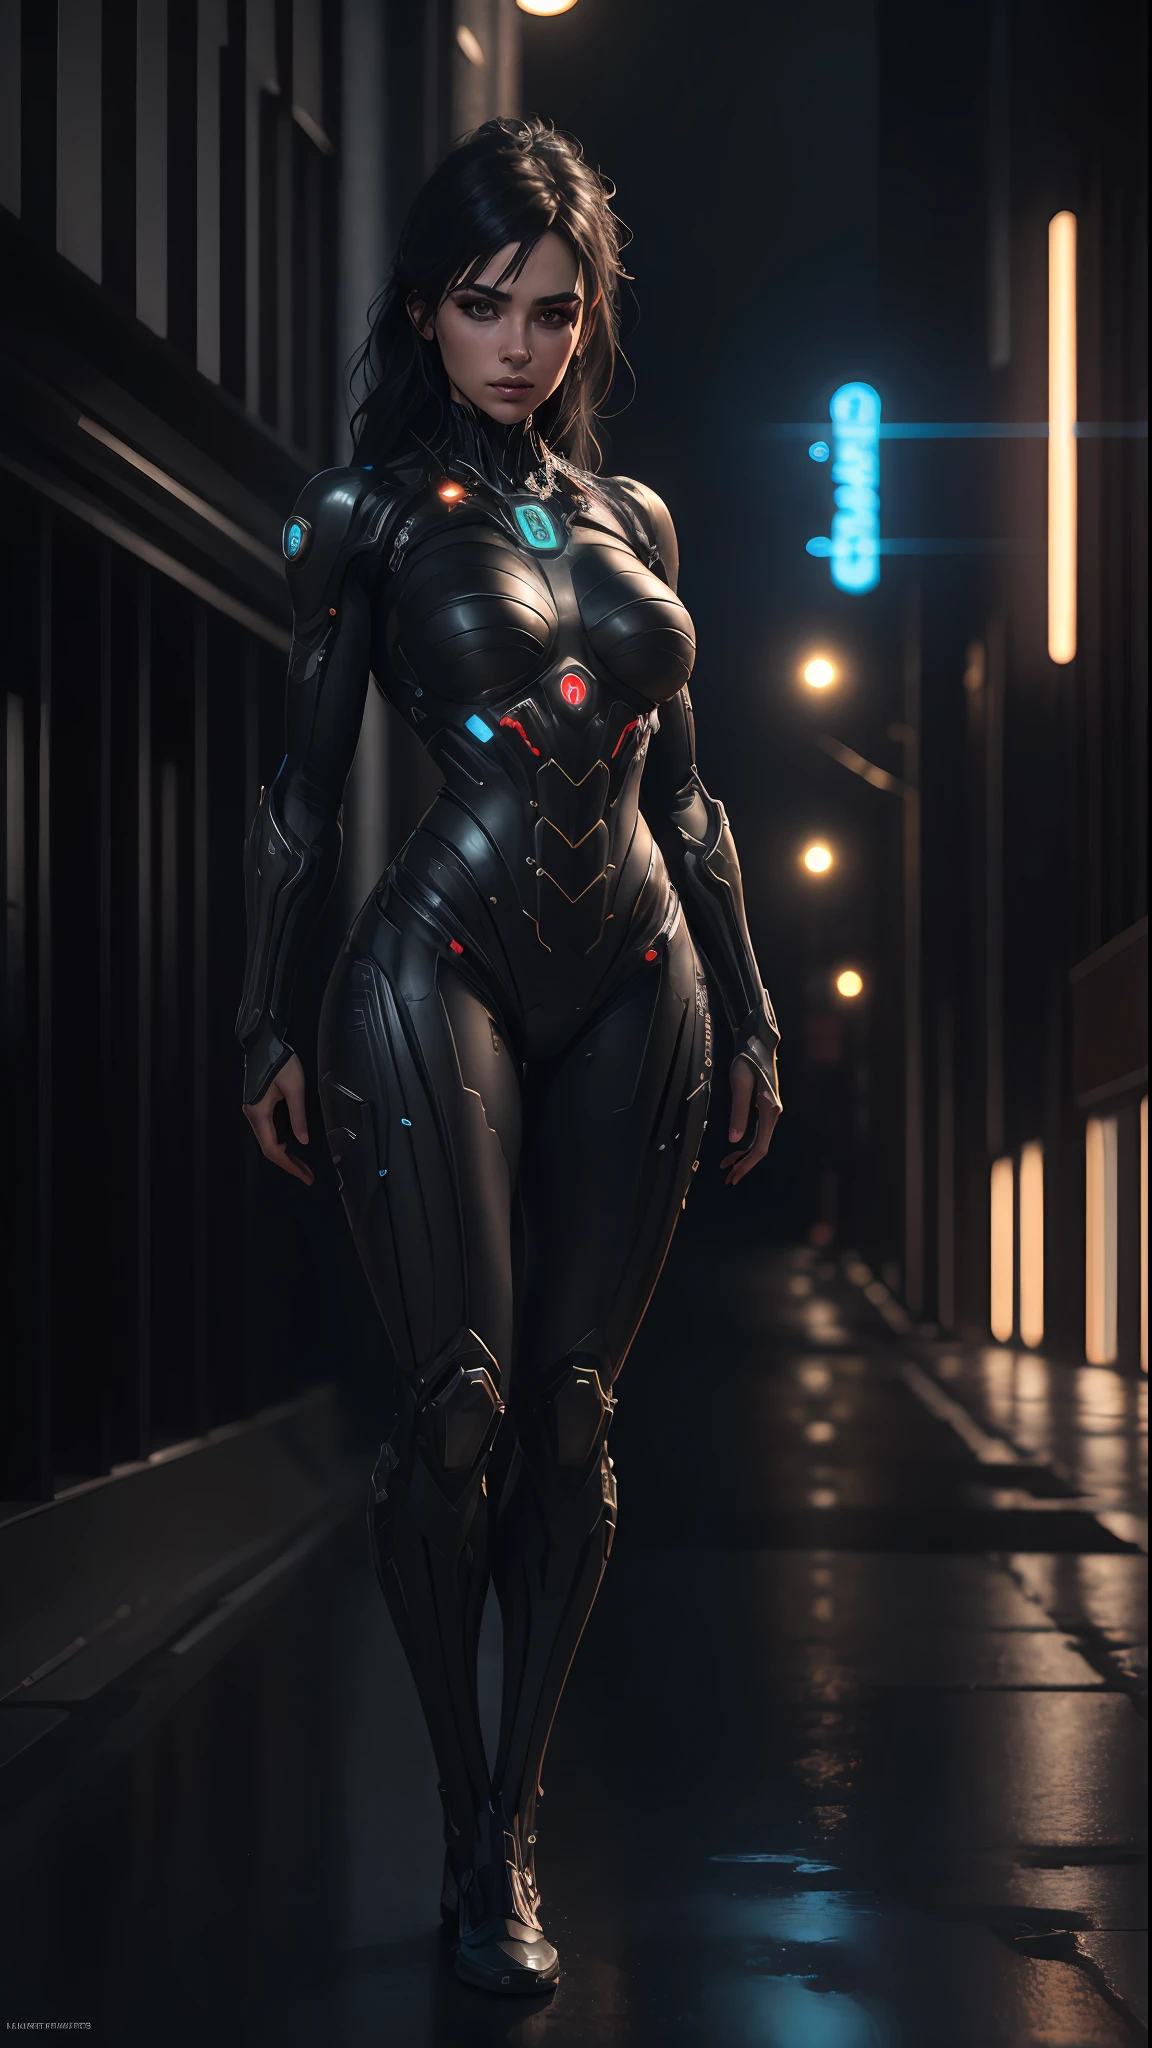 ((Best quality)), ((masterpiece)), (detailed:1.4), 3D, an image of a beautiful cyberpunk female, [[[[Hermiona Granger face]]]] HDR (High Dynamic Range),Ray Tracing,NVIDIA RTX,Super-Resolution,Unreal 5,Subsurface scattering,PBR Texturing,Post-processing,Anisotropic Filtering,Depth-of-field,Maximum clarity and sharpness,Multi-layered textures,Albedo and Specular maps,Surface shading,Accurate simulation of light-material interaction,Perfect proportions,Octane Render,Two-tone lighting,Wide aperture,Low ISO,White balance,Rule of thirds,8K RAW, crysisnanosuit, ceberpunk city in the background, neon lights